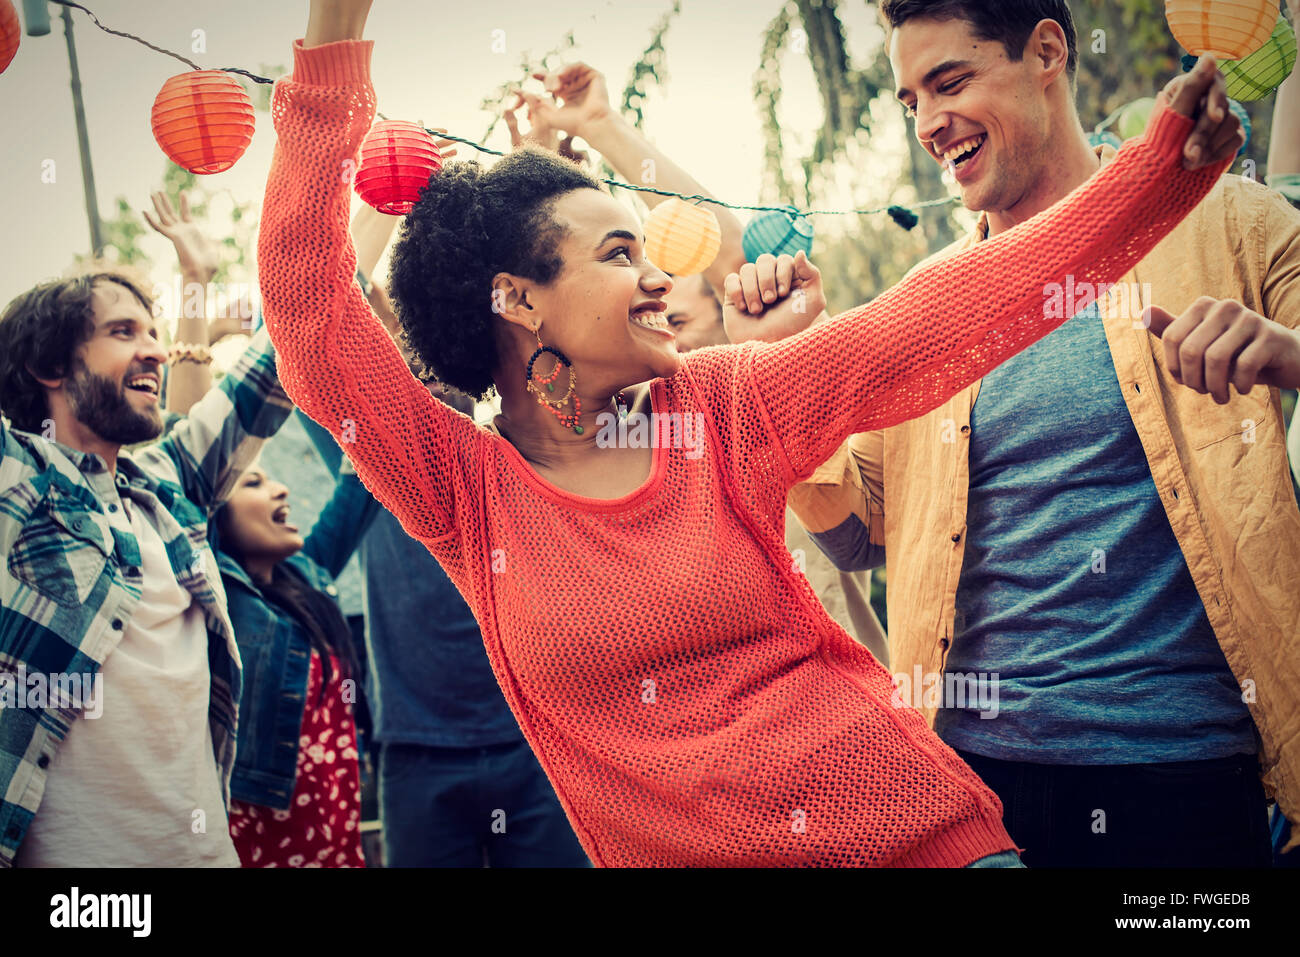 A group of men and women at a party dancing outdoors. Stock Photo